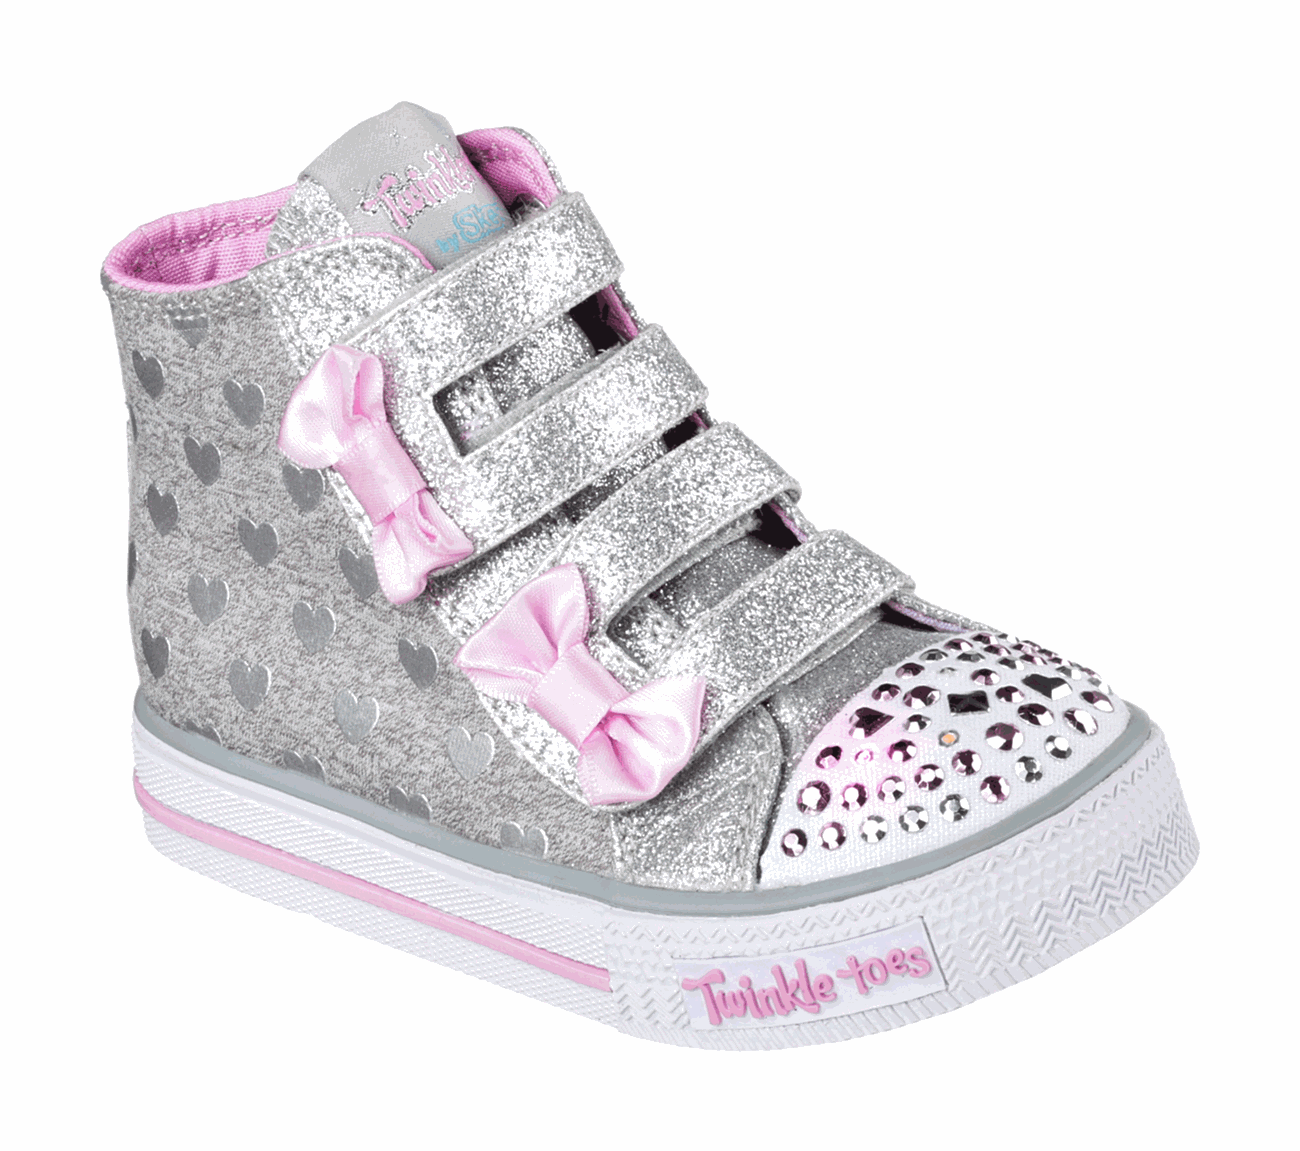 SKECHERS SHUFFLES - DOODLE DAYS – The 